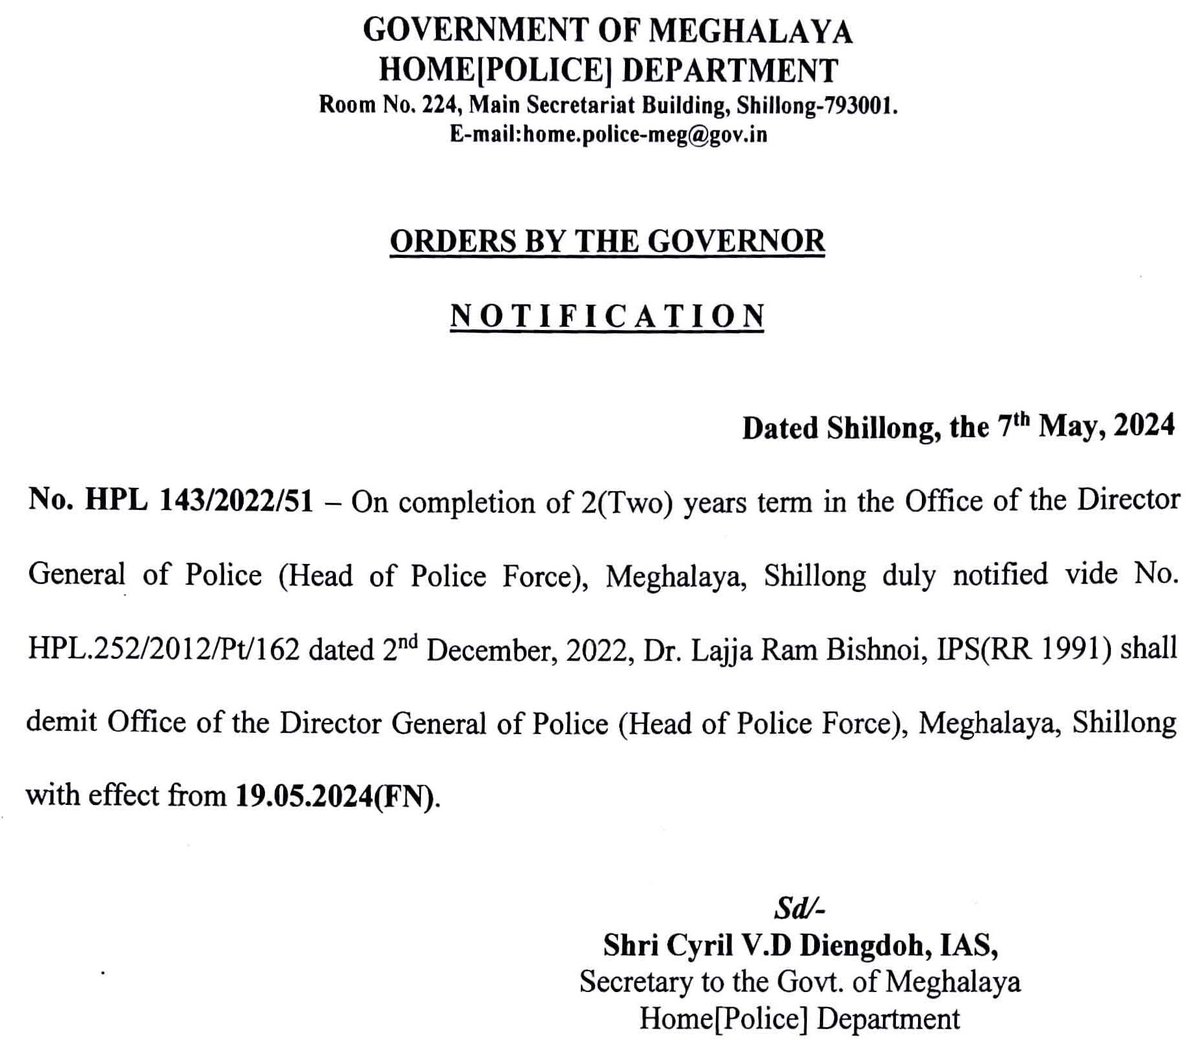 Dr. @lrbishnoiips shall #DemitOffice of the Director General of Police (Head of Police Force), #Meghalaya, Shillong w.e.f. 19th of May, 2024 @CyrilDiengdoh @MeghalayaPolice (meghalaya.gov.in/sites/default/…)